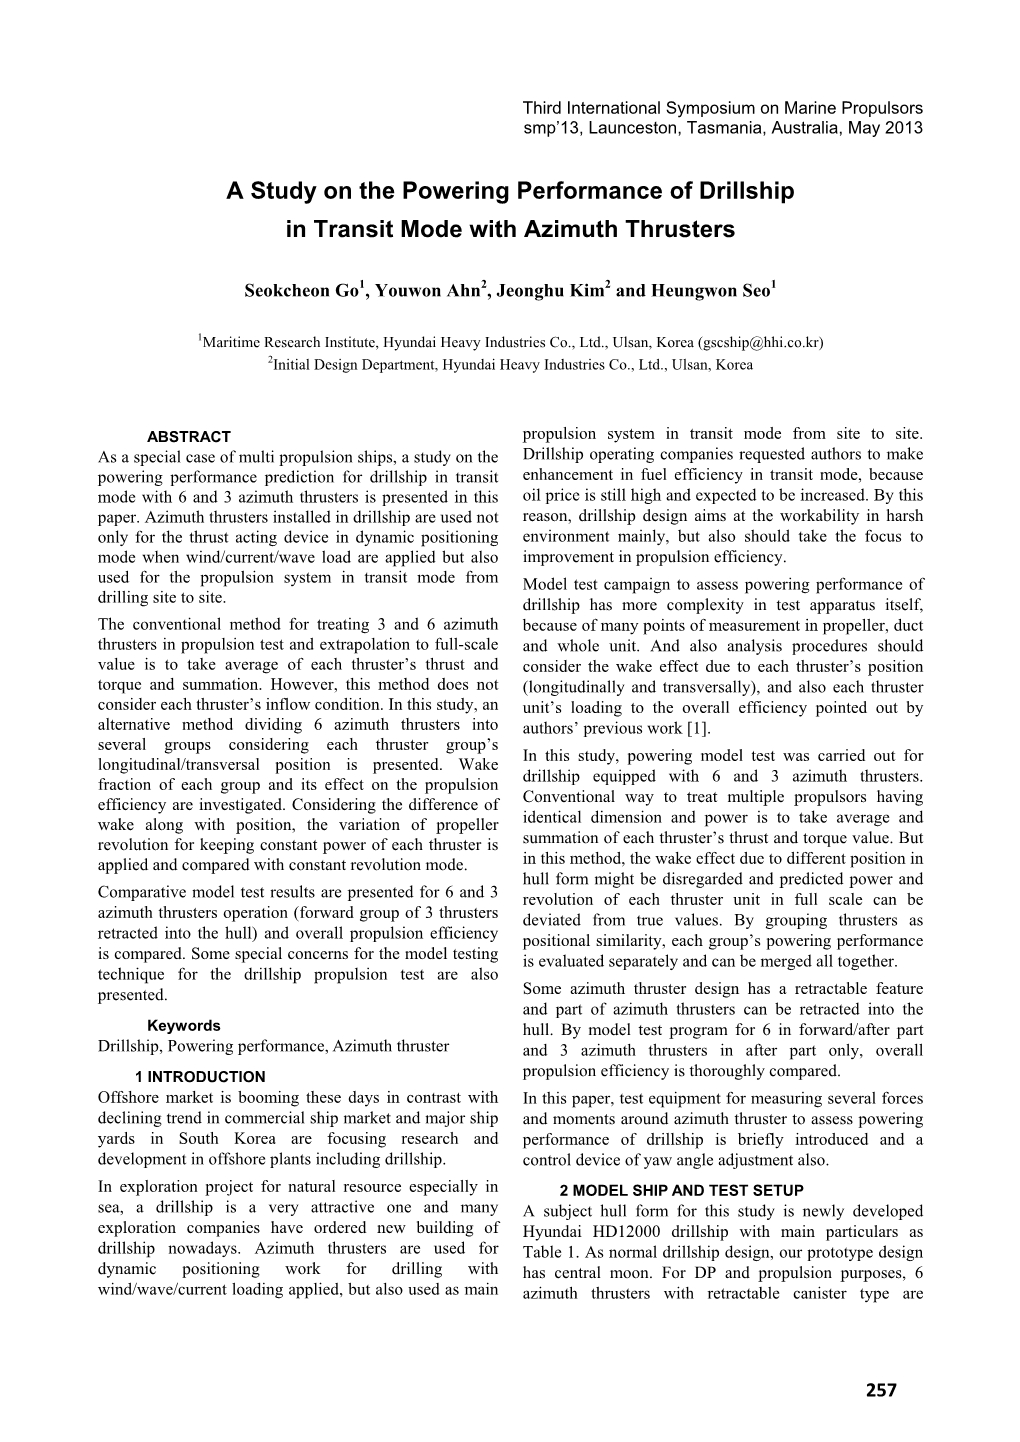 A Study on the Powering Performance of Drillship in Transit Mode with Azimuth Thrusters